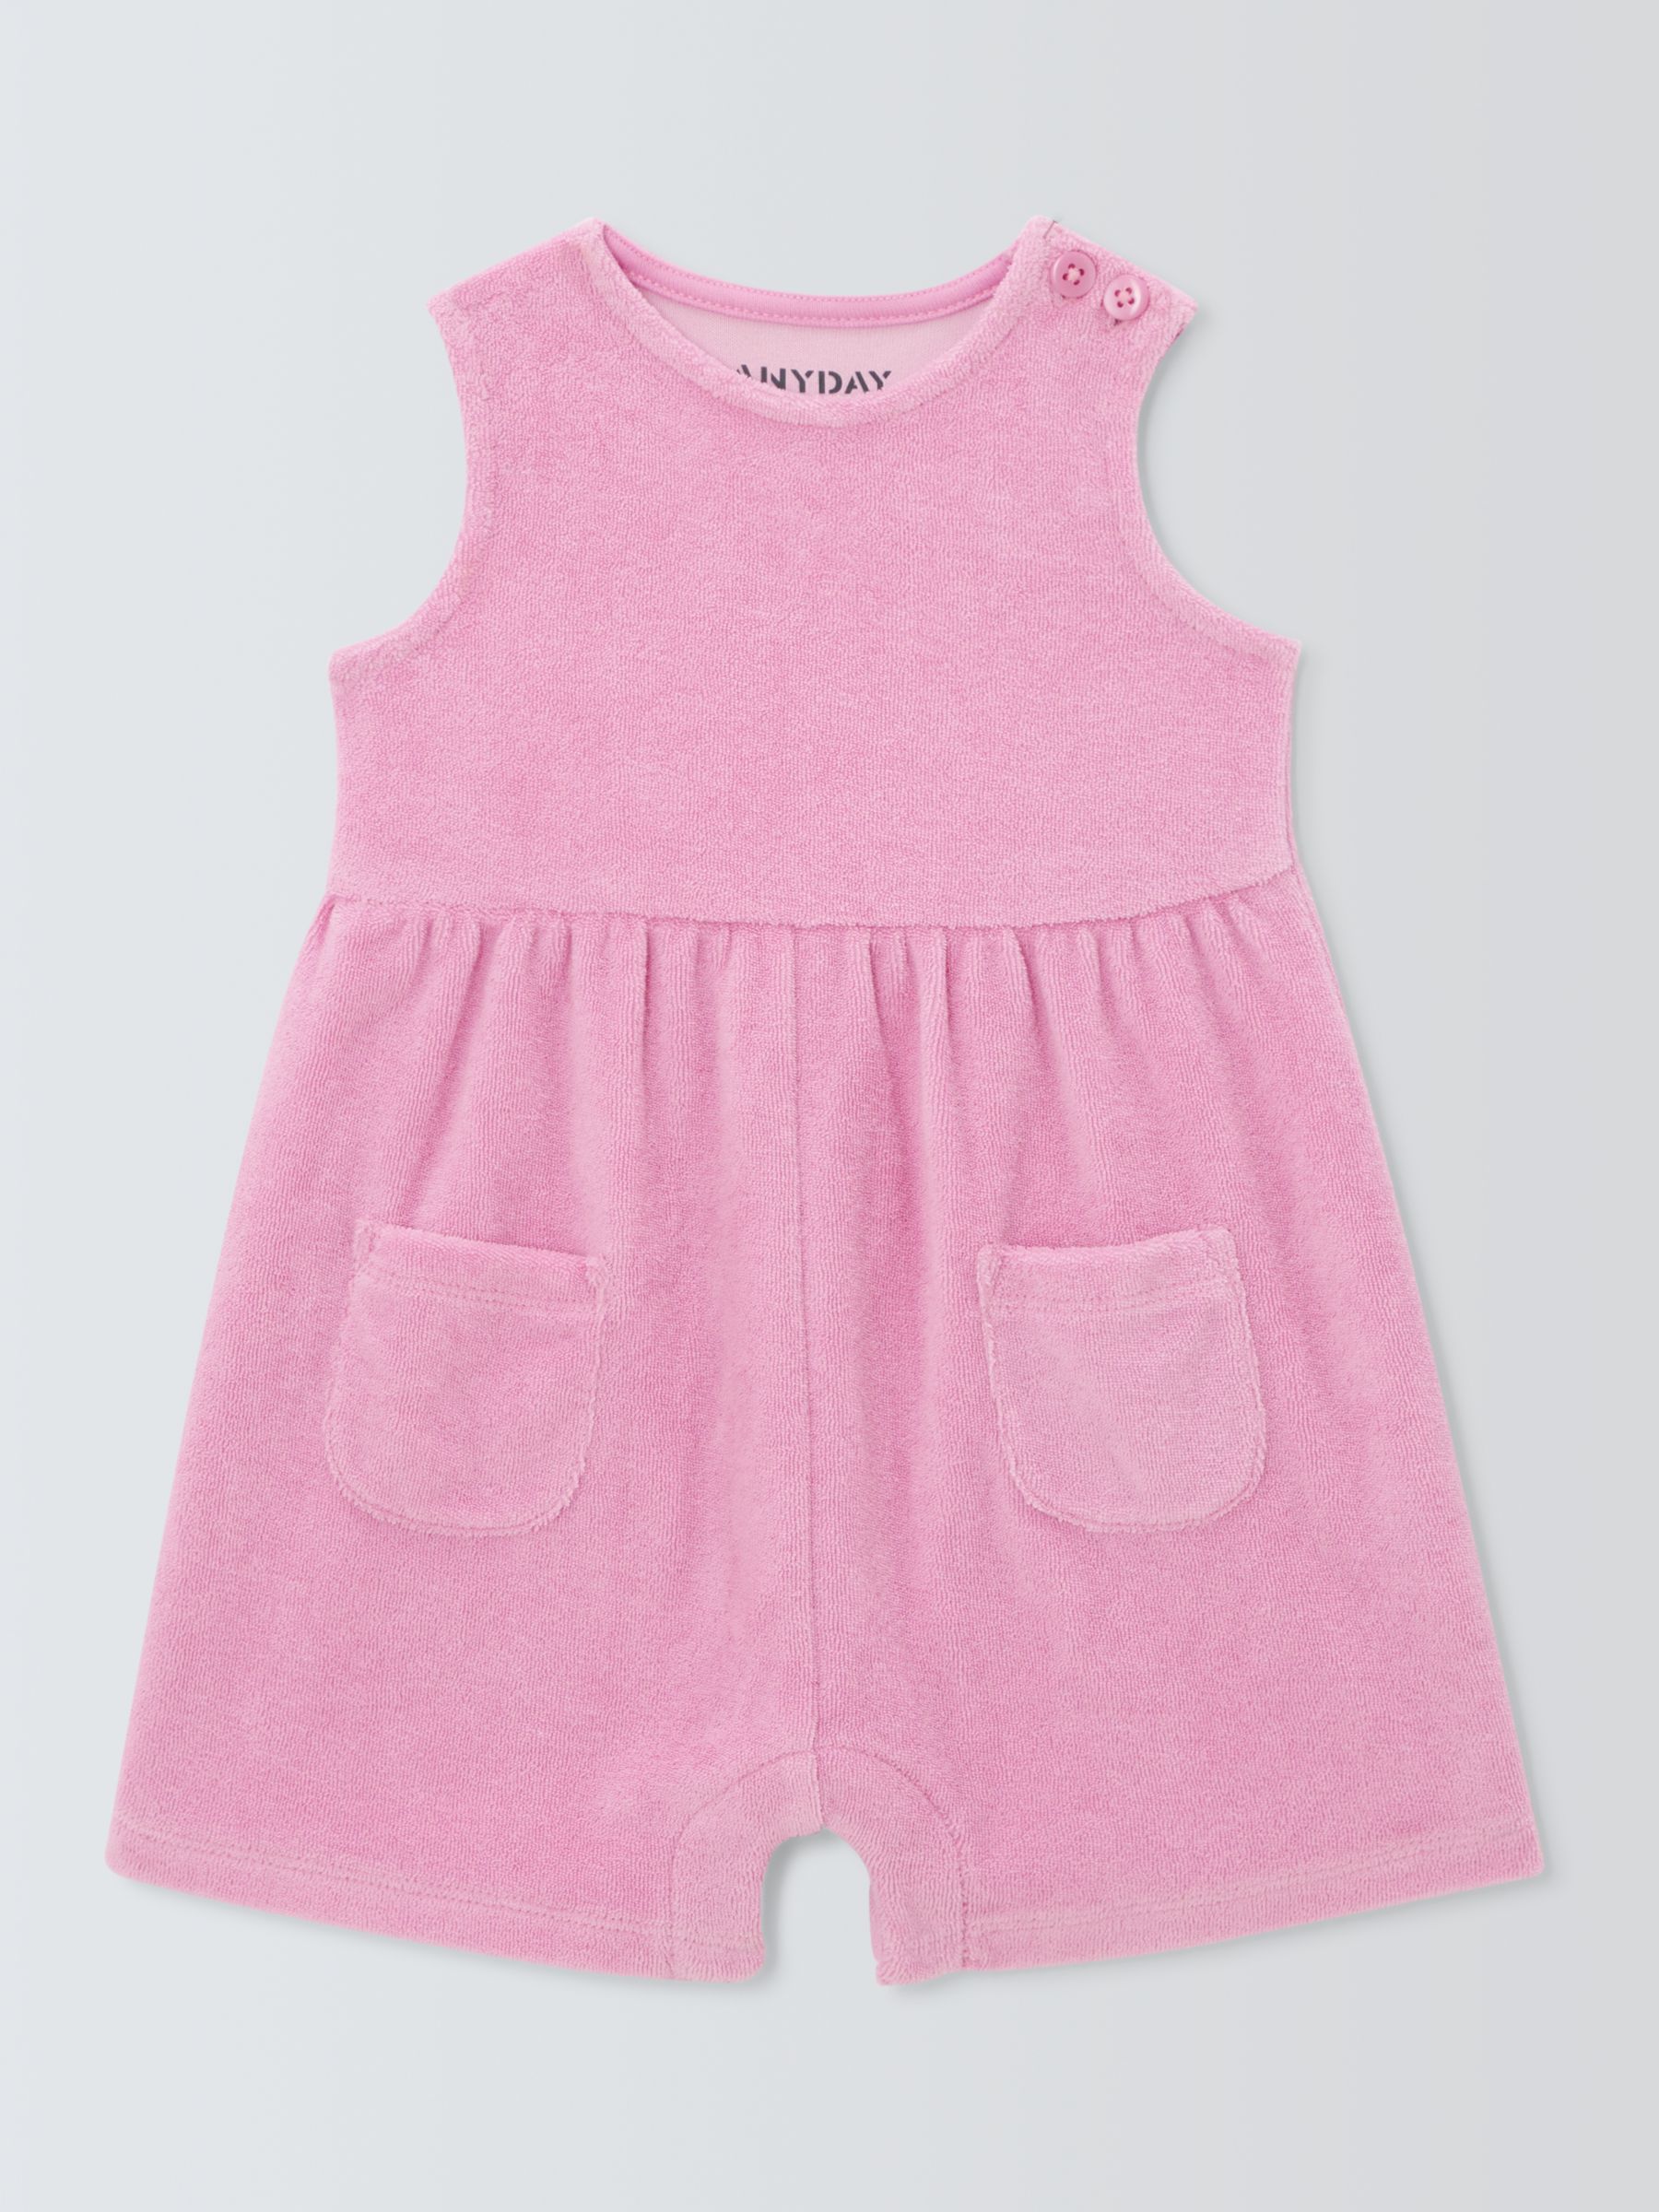 John Lewis ANYDAY Baby Towelling Playsuit, Pink, 9-12 months